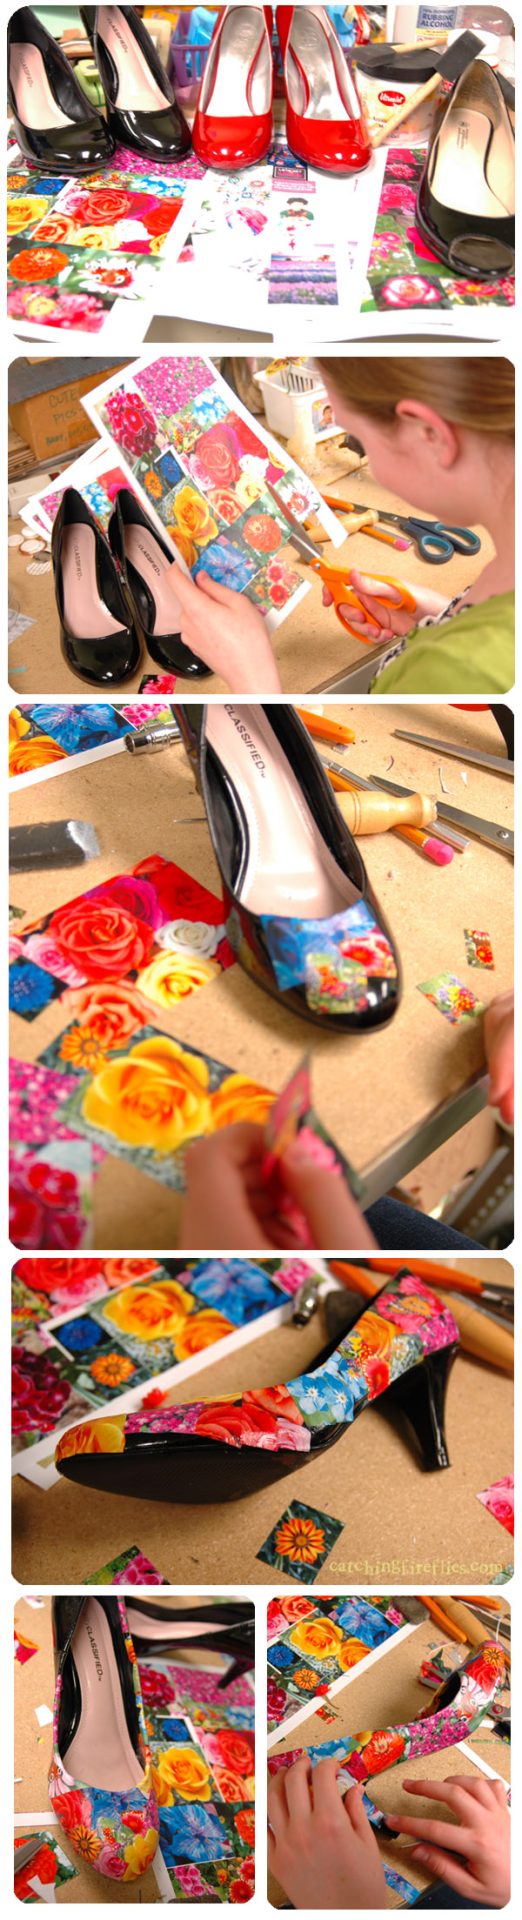 diy shoe heels projects ideas makeover